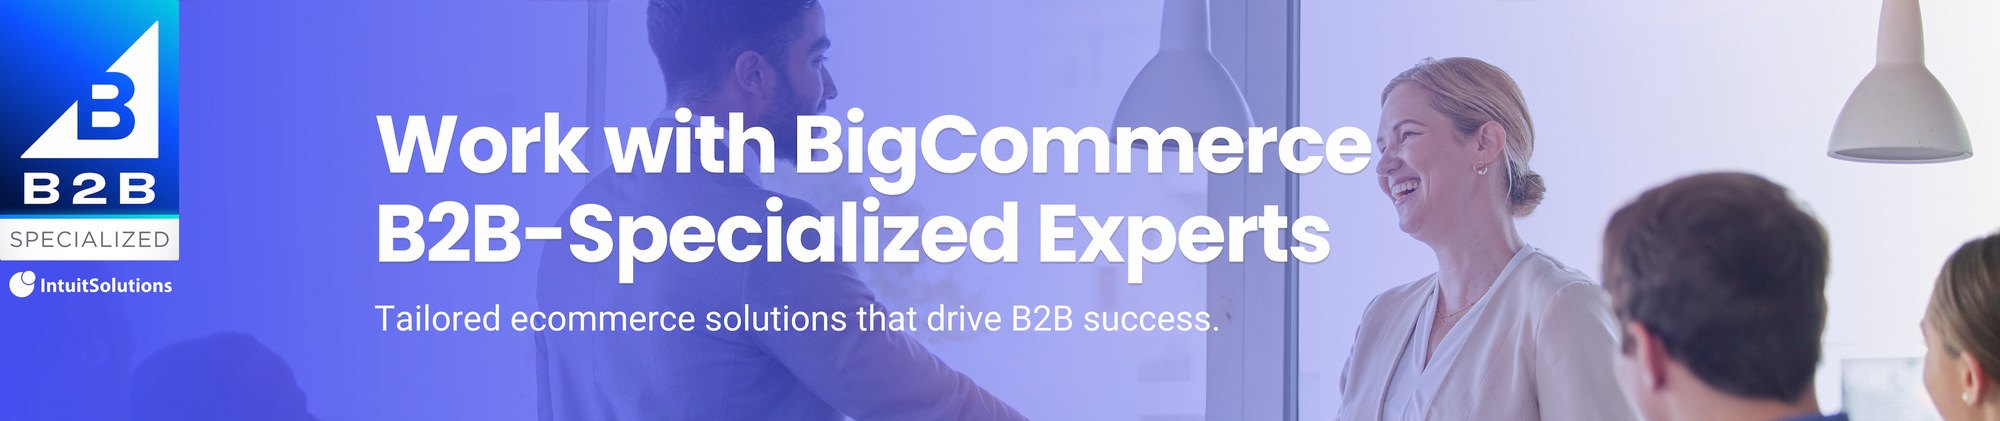 Work with BigCommerce B2B-Specialized Experts